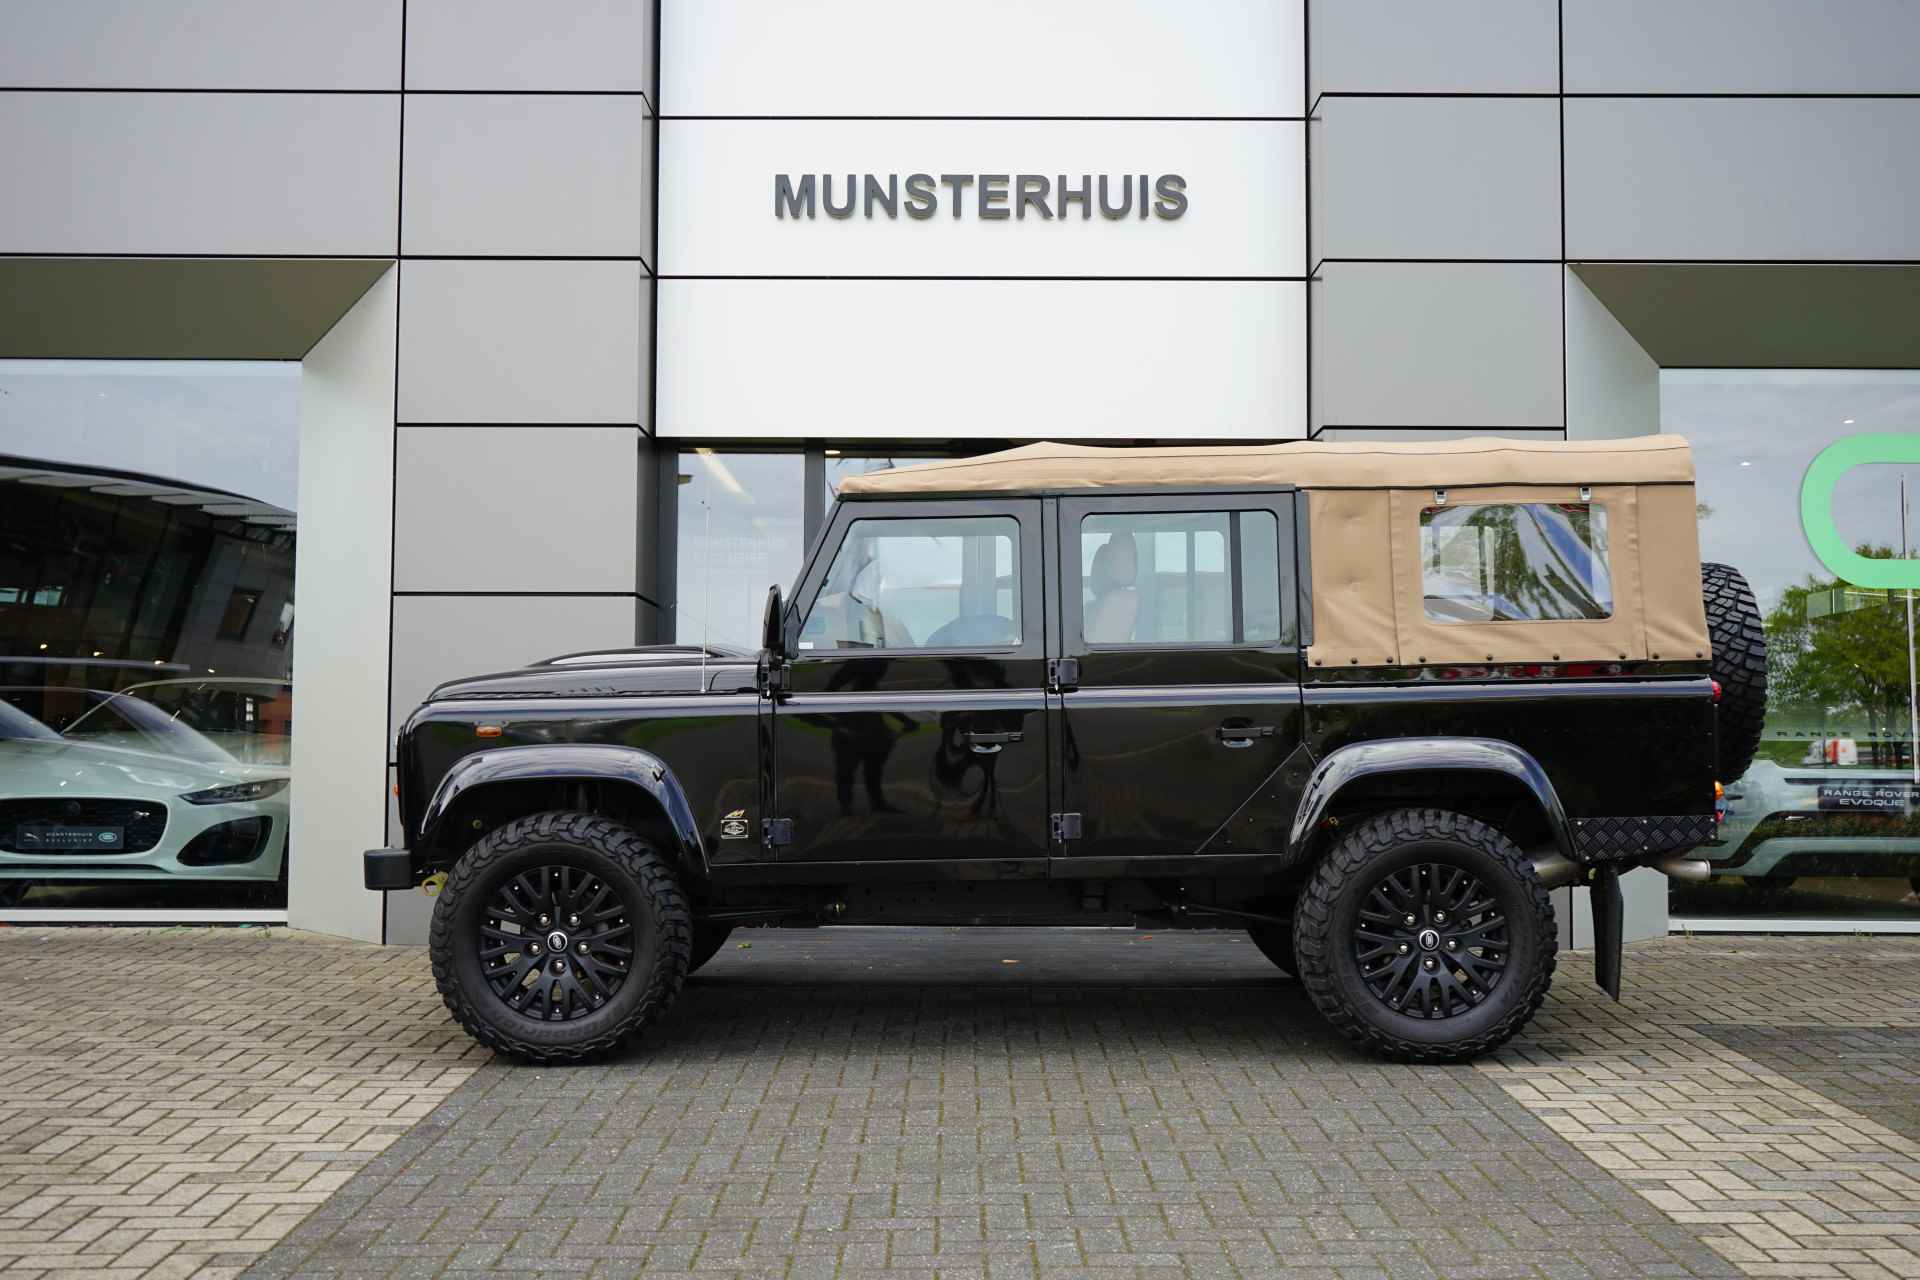 Land Rover Defender 2.4 TD 110 SW Convertible Brand New - River House Rebuild, Butterscotch Leather, BF Goodridge Tyres - 6/26